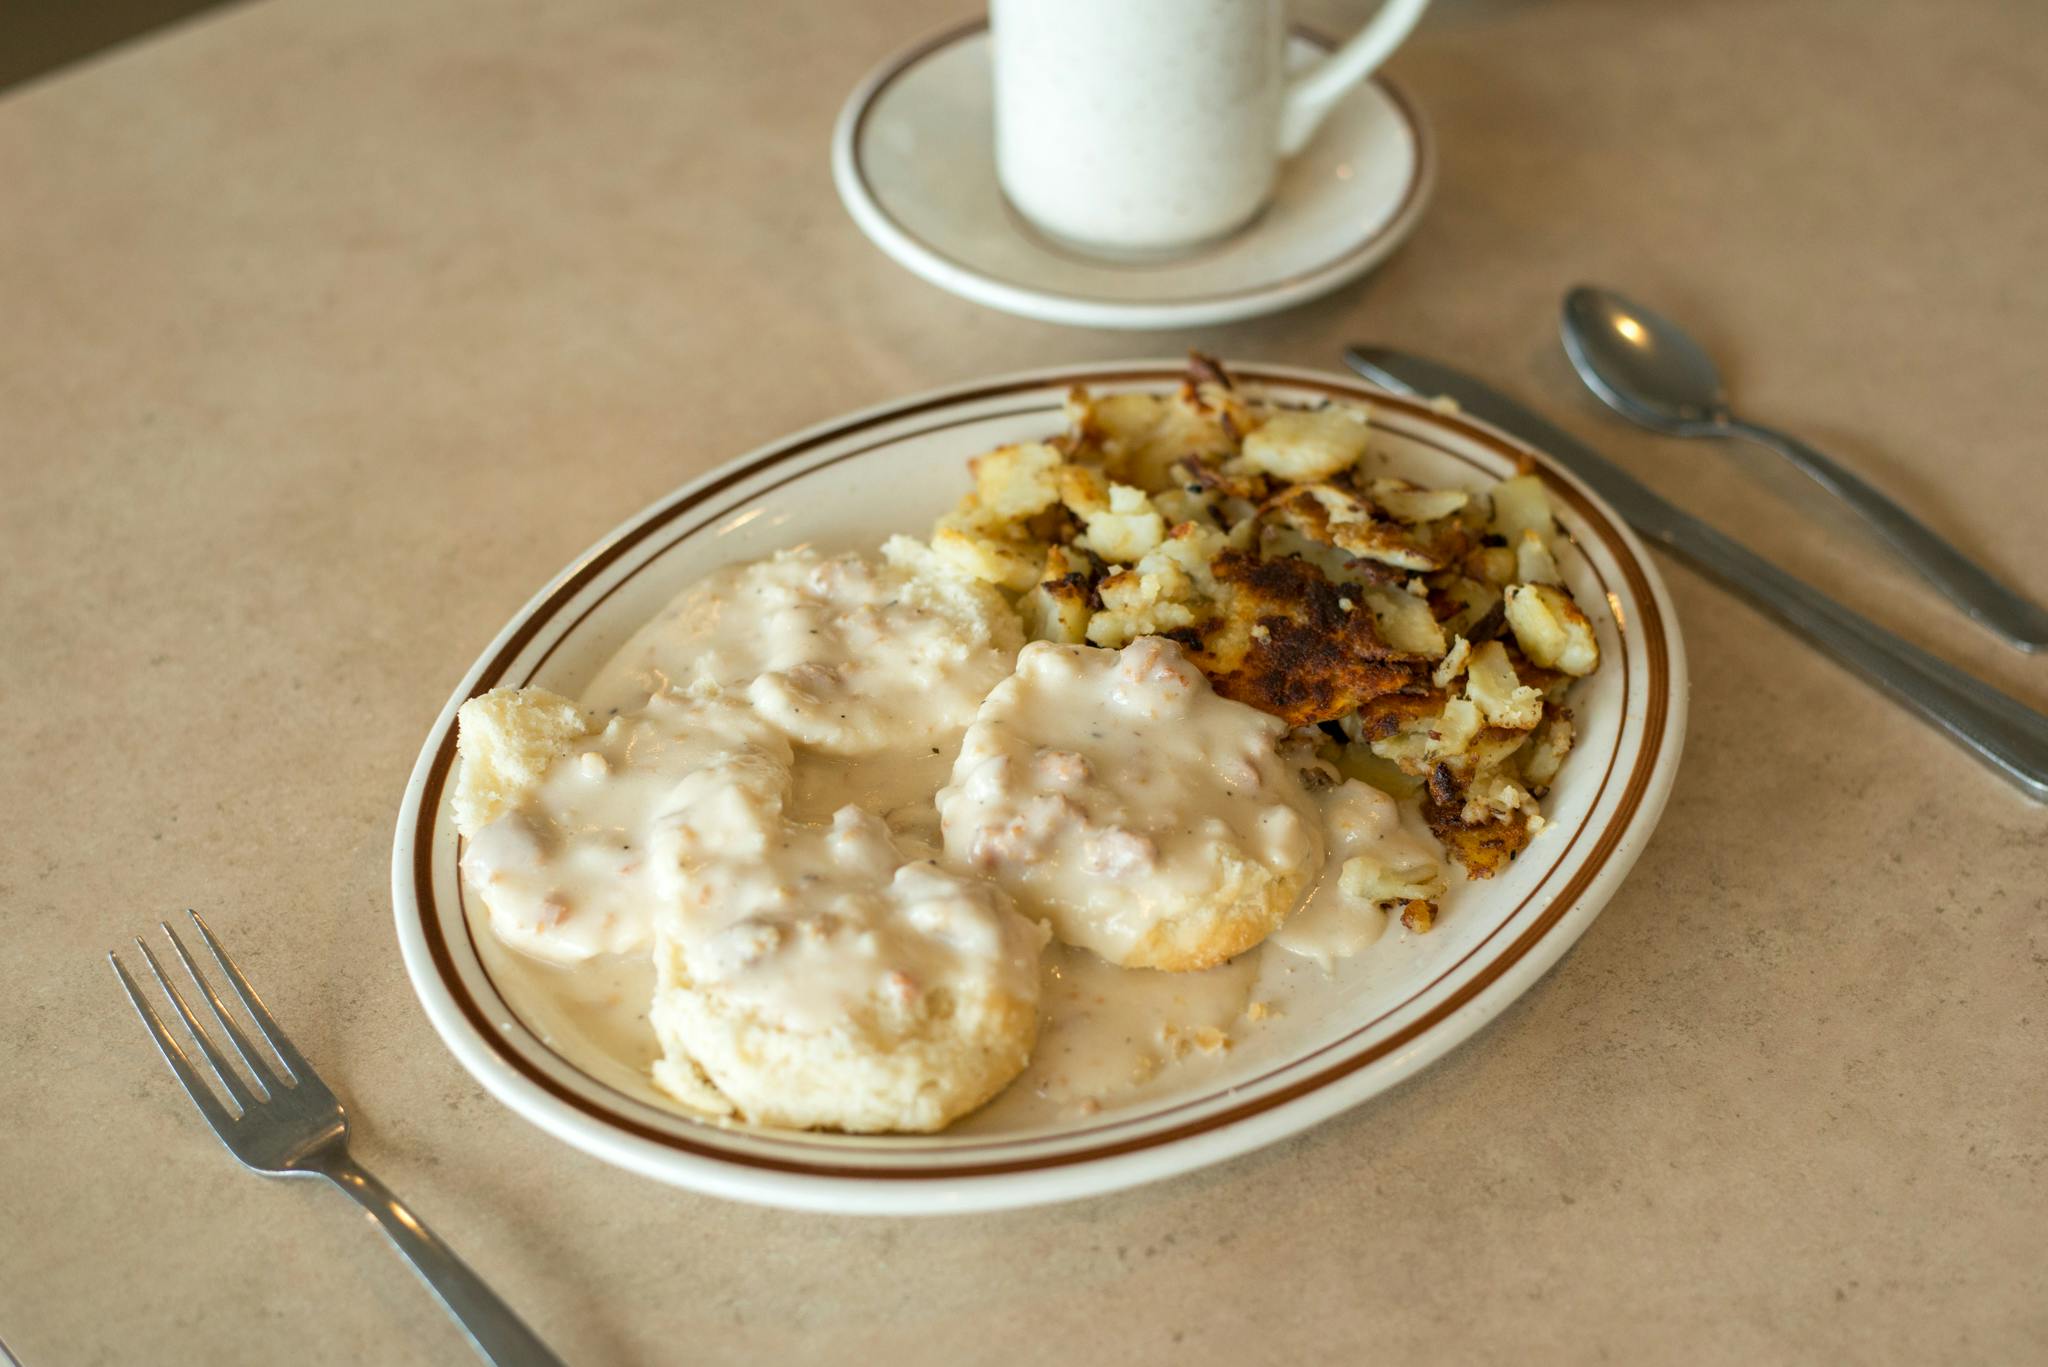 Biscuits and Gravy Breakfast from The Pancake Place in Green Bay, WI